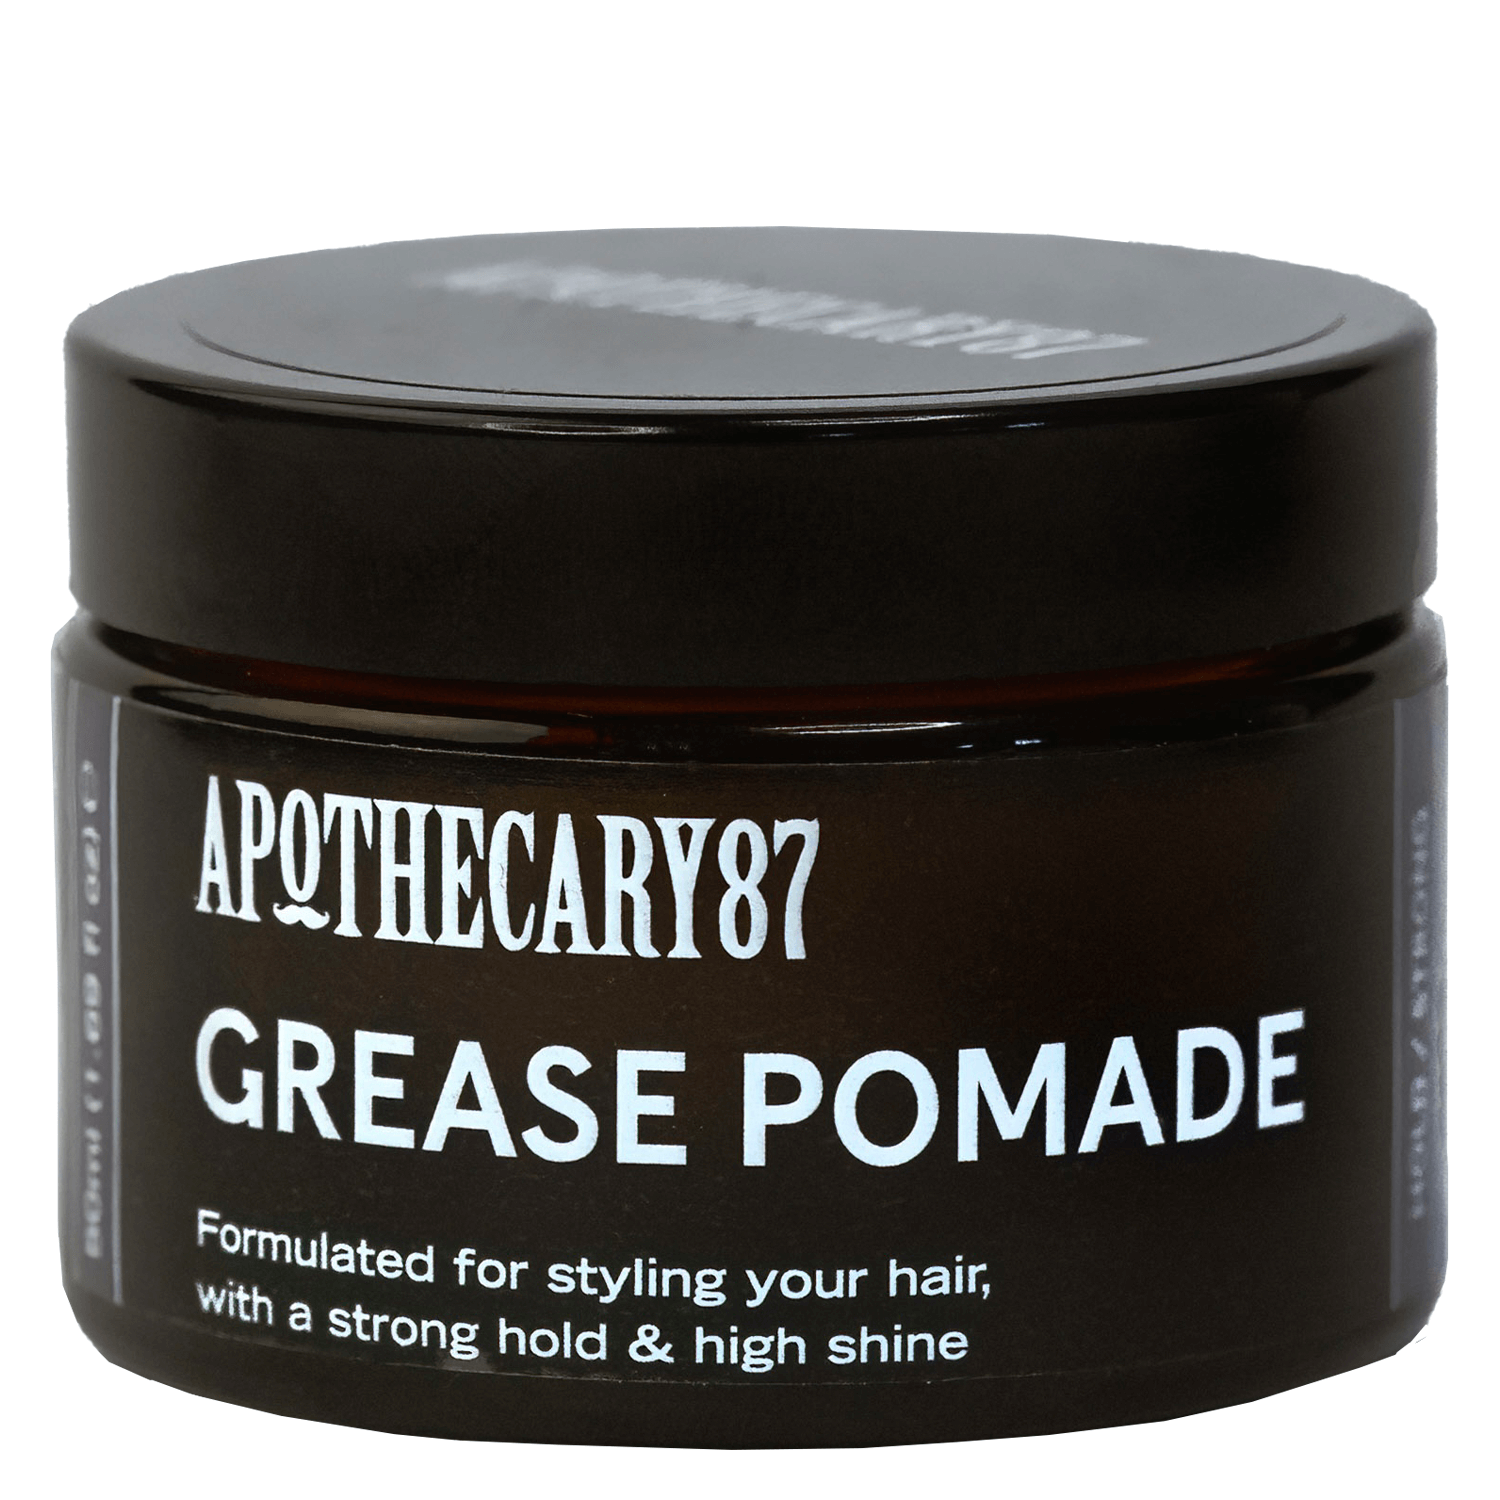 Produktbild von Apothecary87 Grooming - Grease Pomade